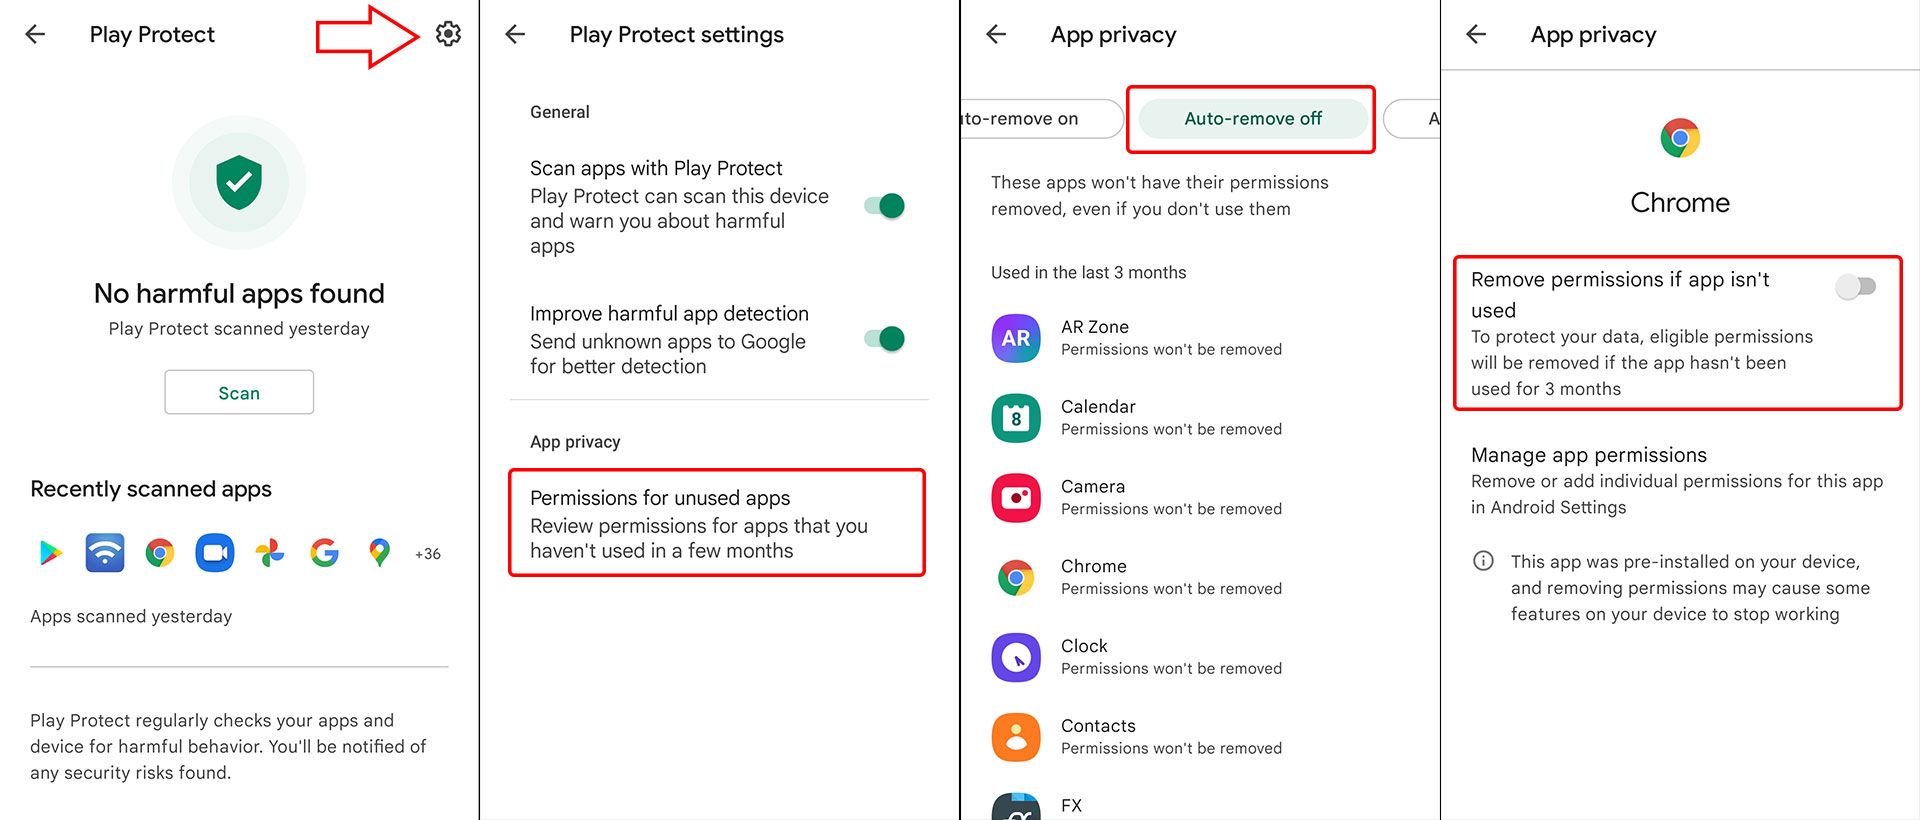 Automatically remove permissions from Google Play